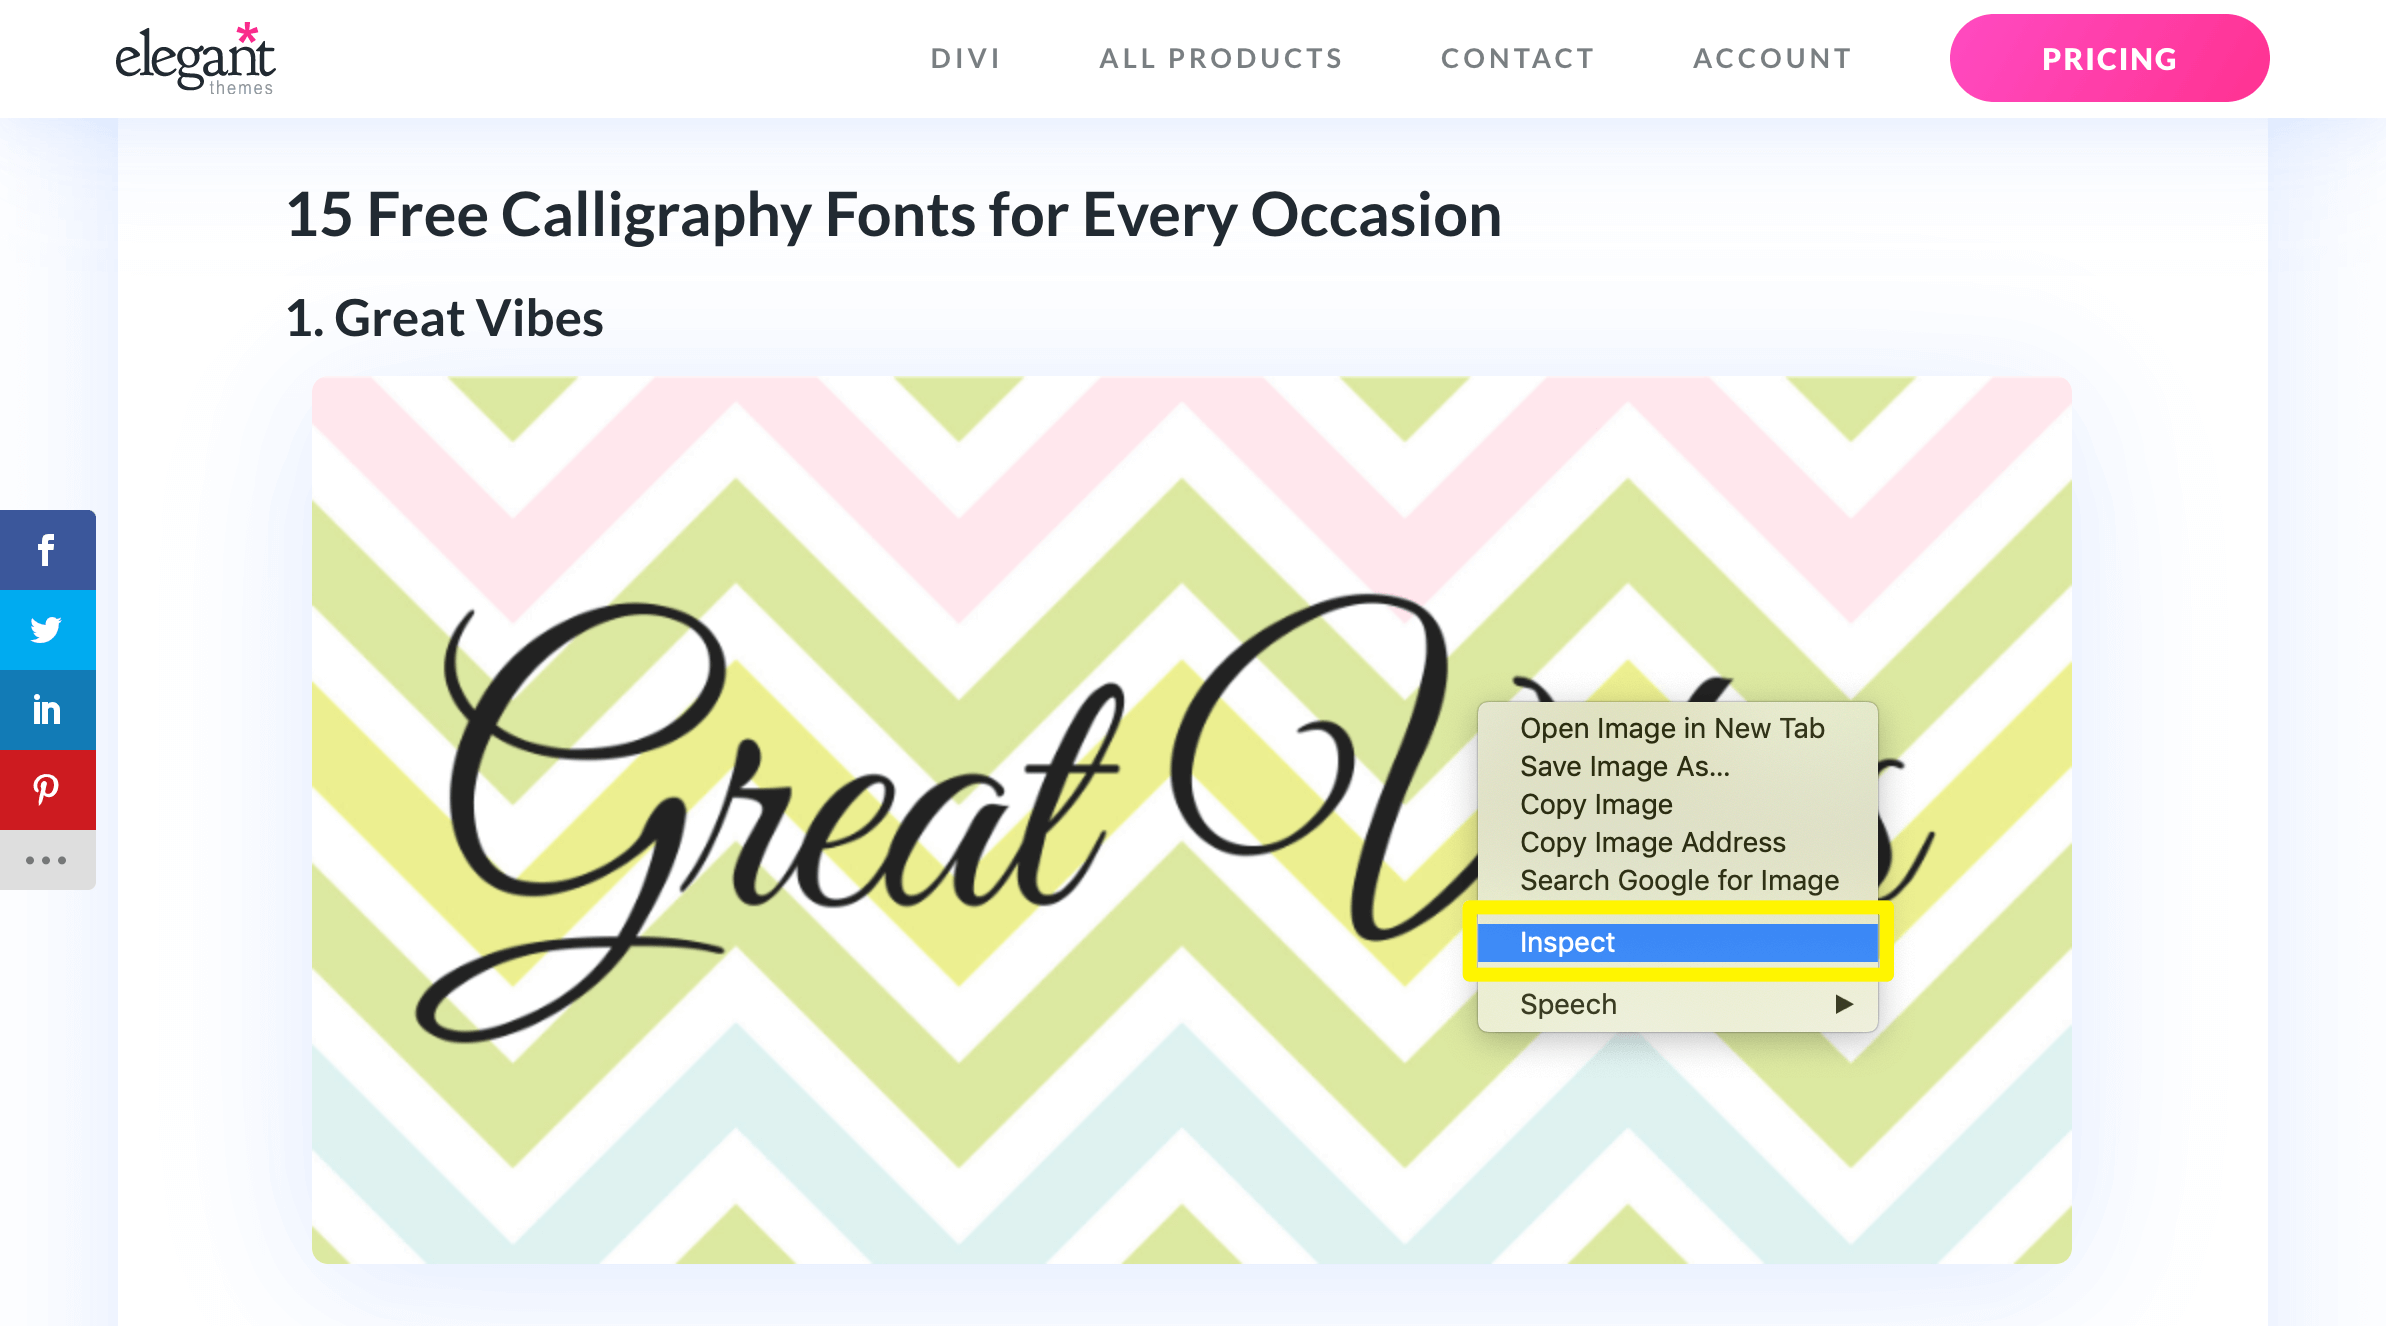 How to download a Font from a Website using Developer Tools